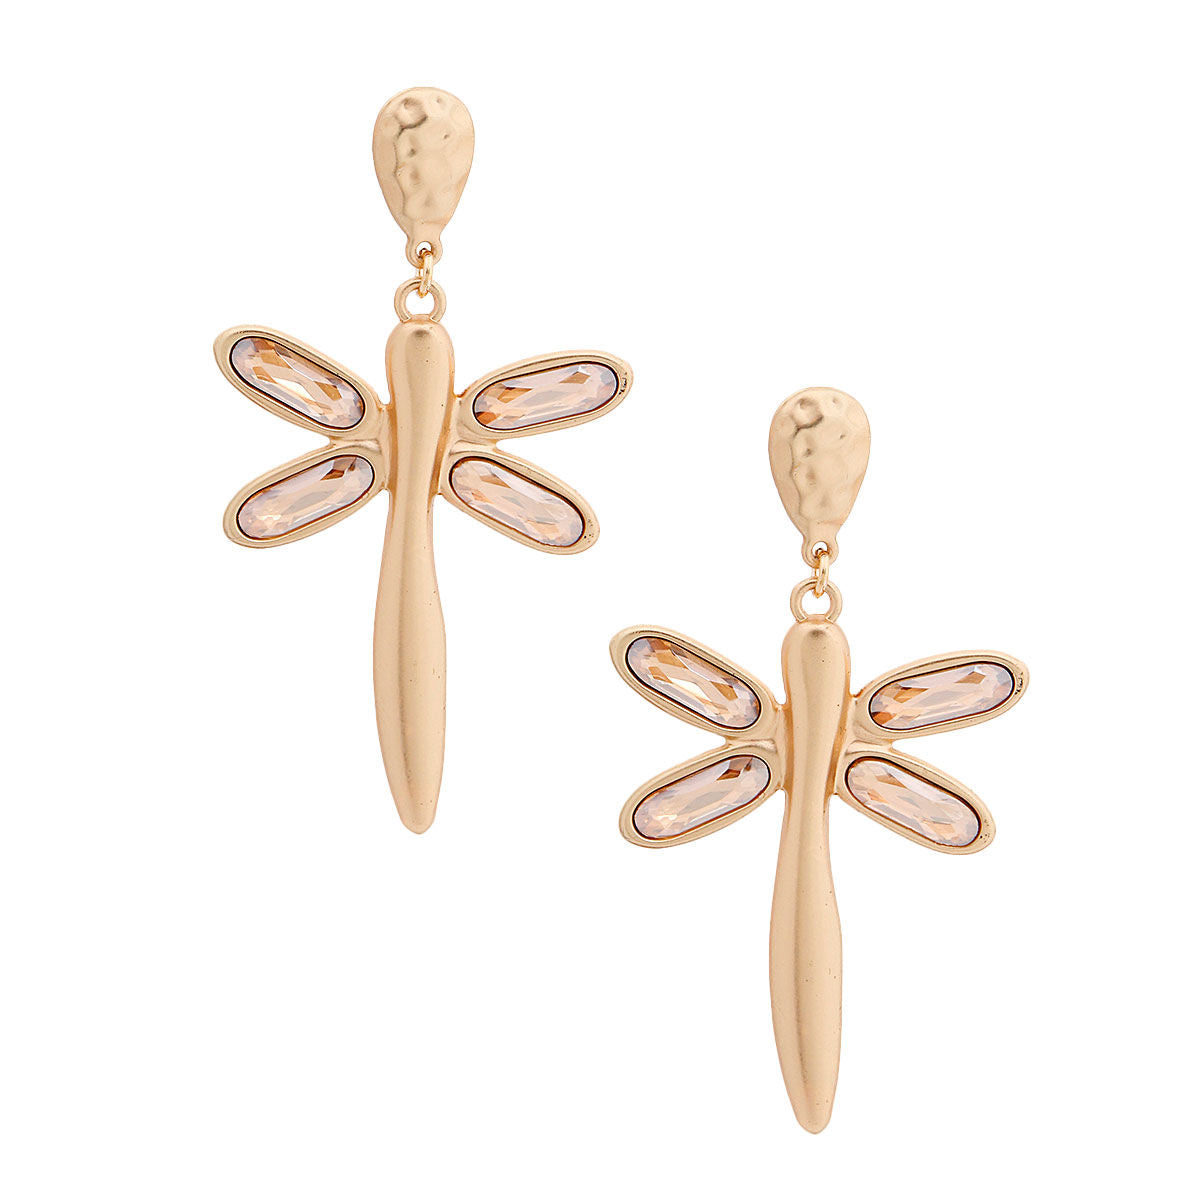 Gold Crystal Dragonfly Earrings